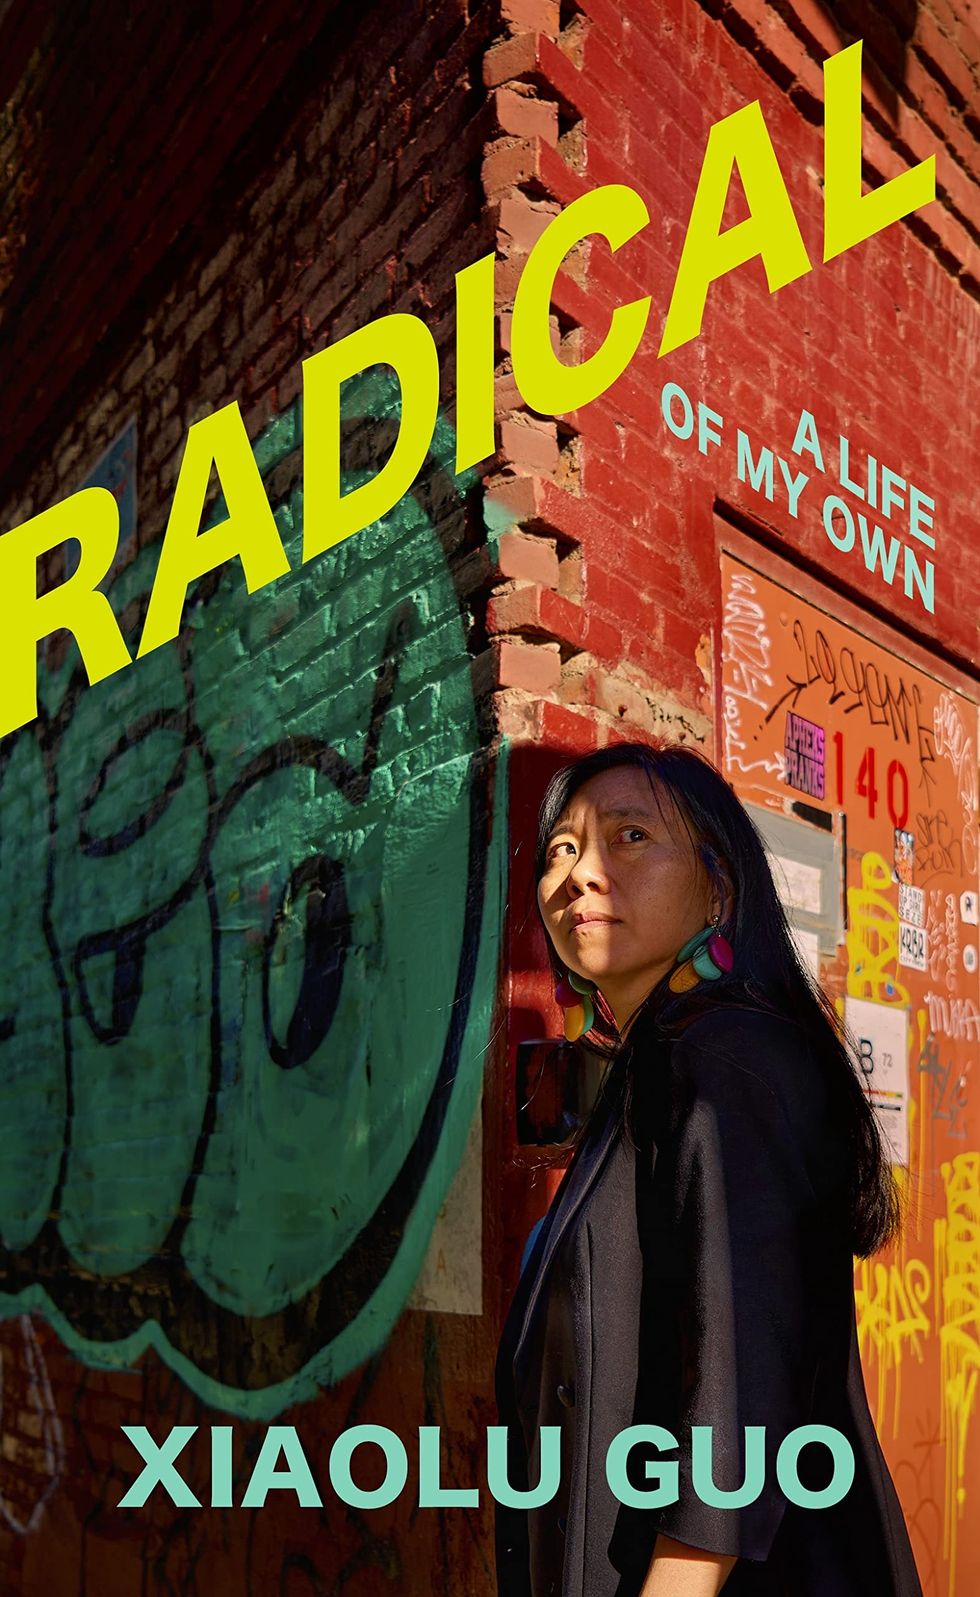 Octavia Bright's Top Pick: Radical: A Life of My Own by Xiaolu Guo